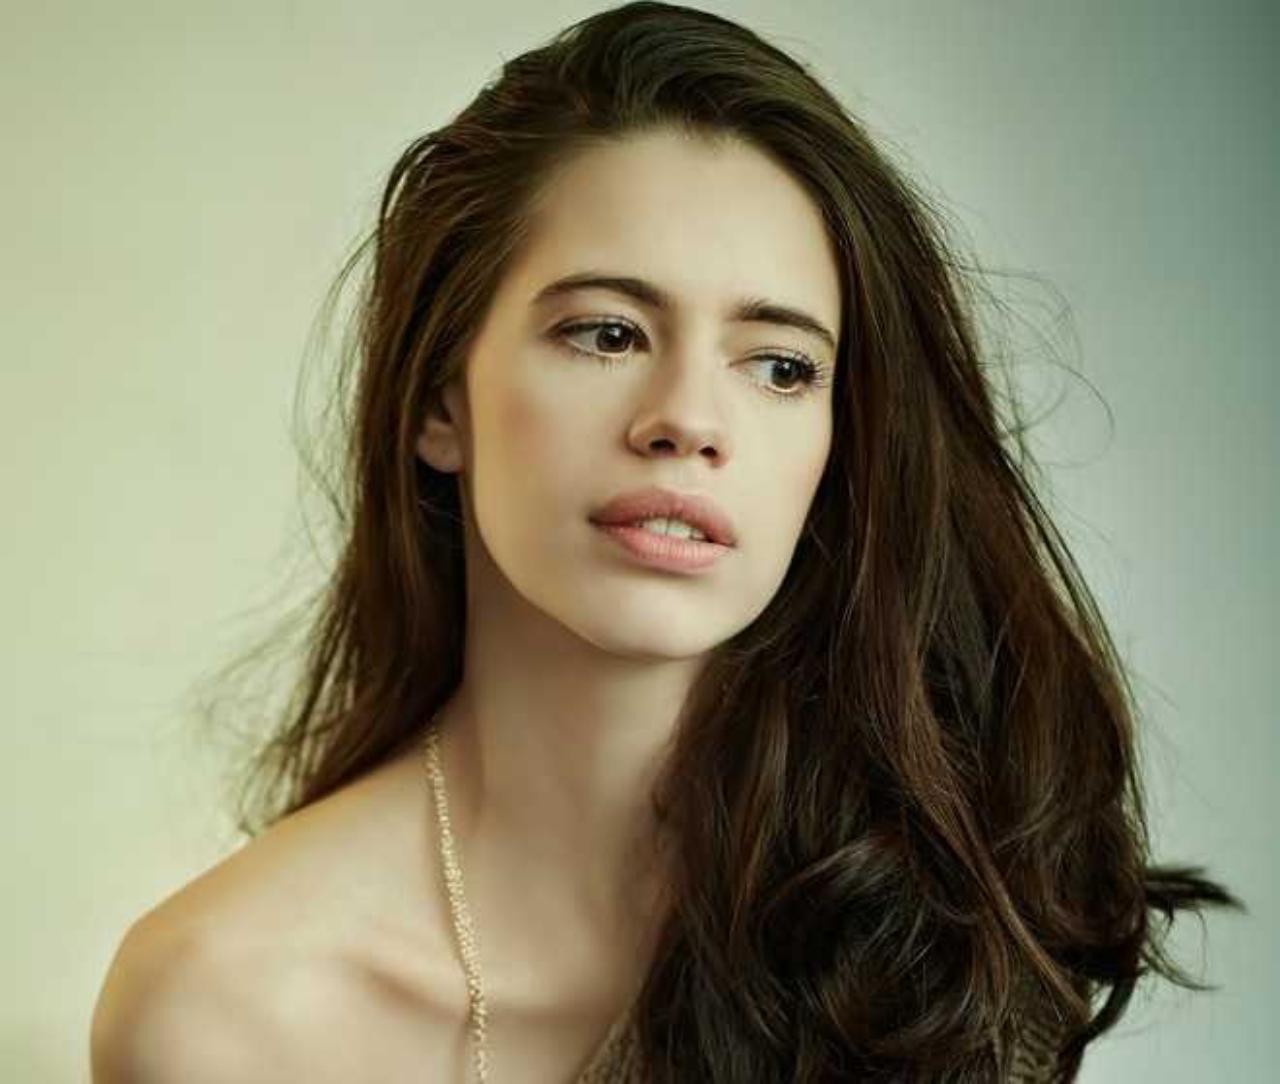 Kalki Koechlin
The very talented Kalki Koechlin has written the only film The Girl in Yellow Boots where she acted in the film showcasing her talent the best possible way. The film was critically acclaimed that was directed by Anurag Kashyap